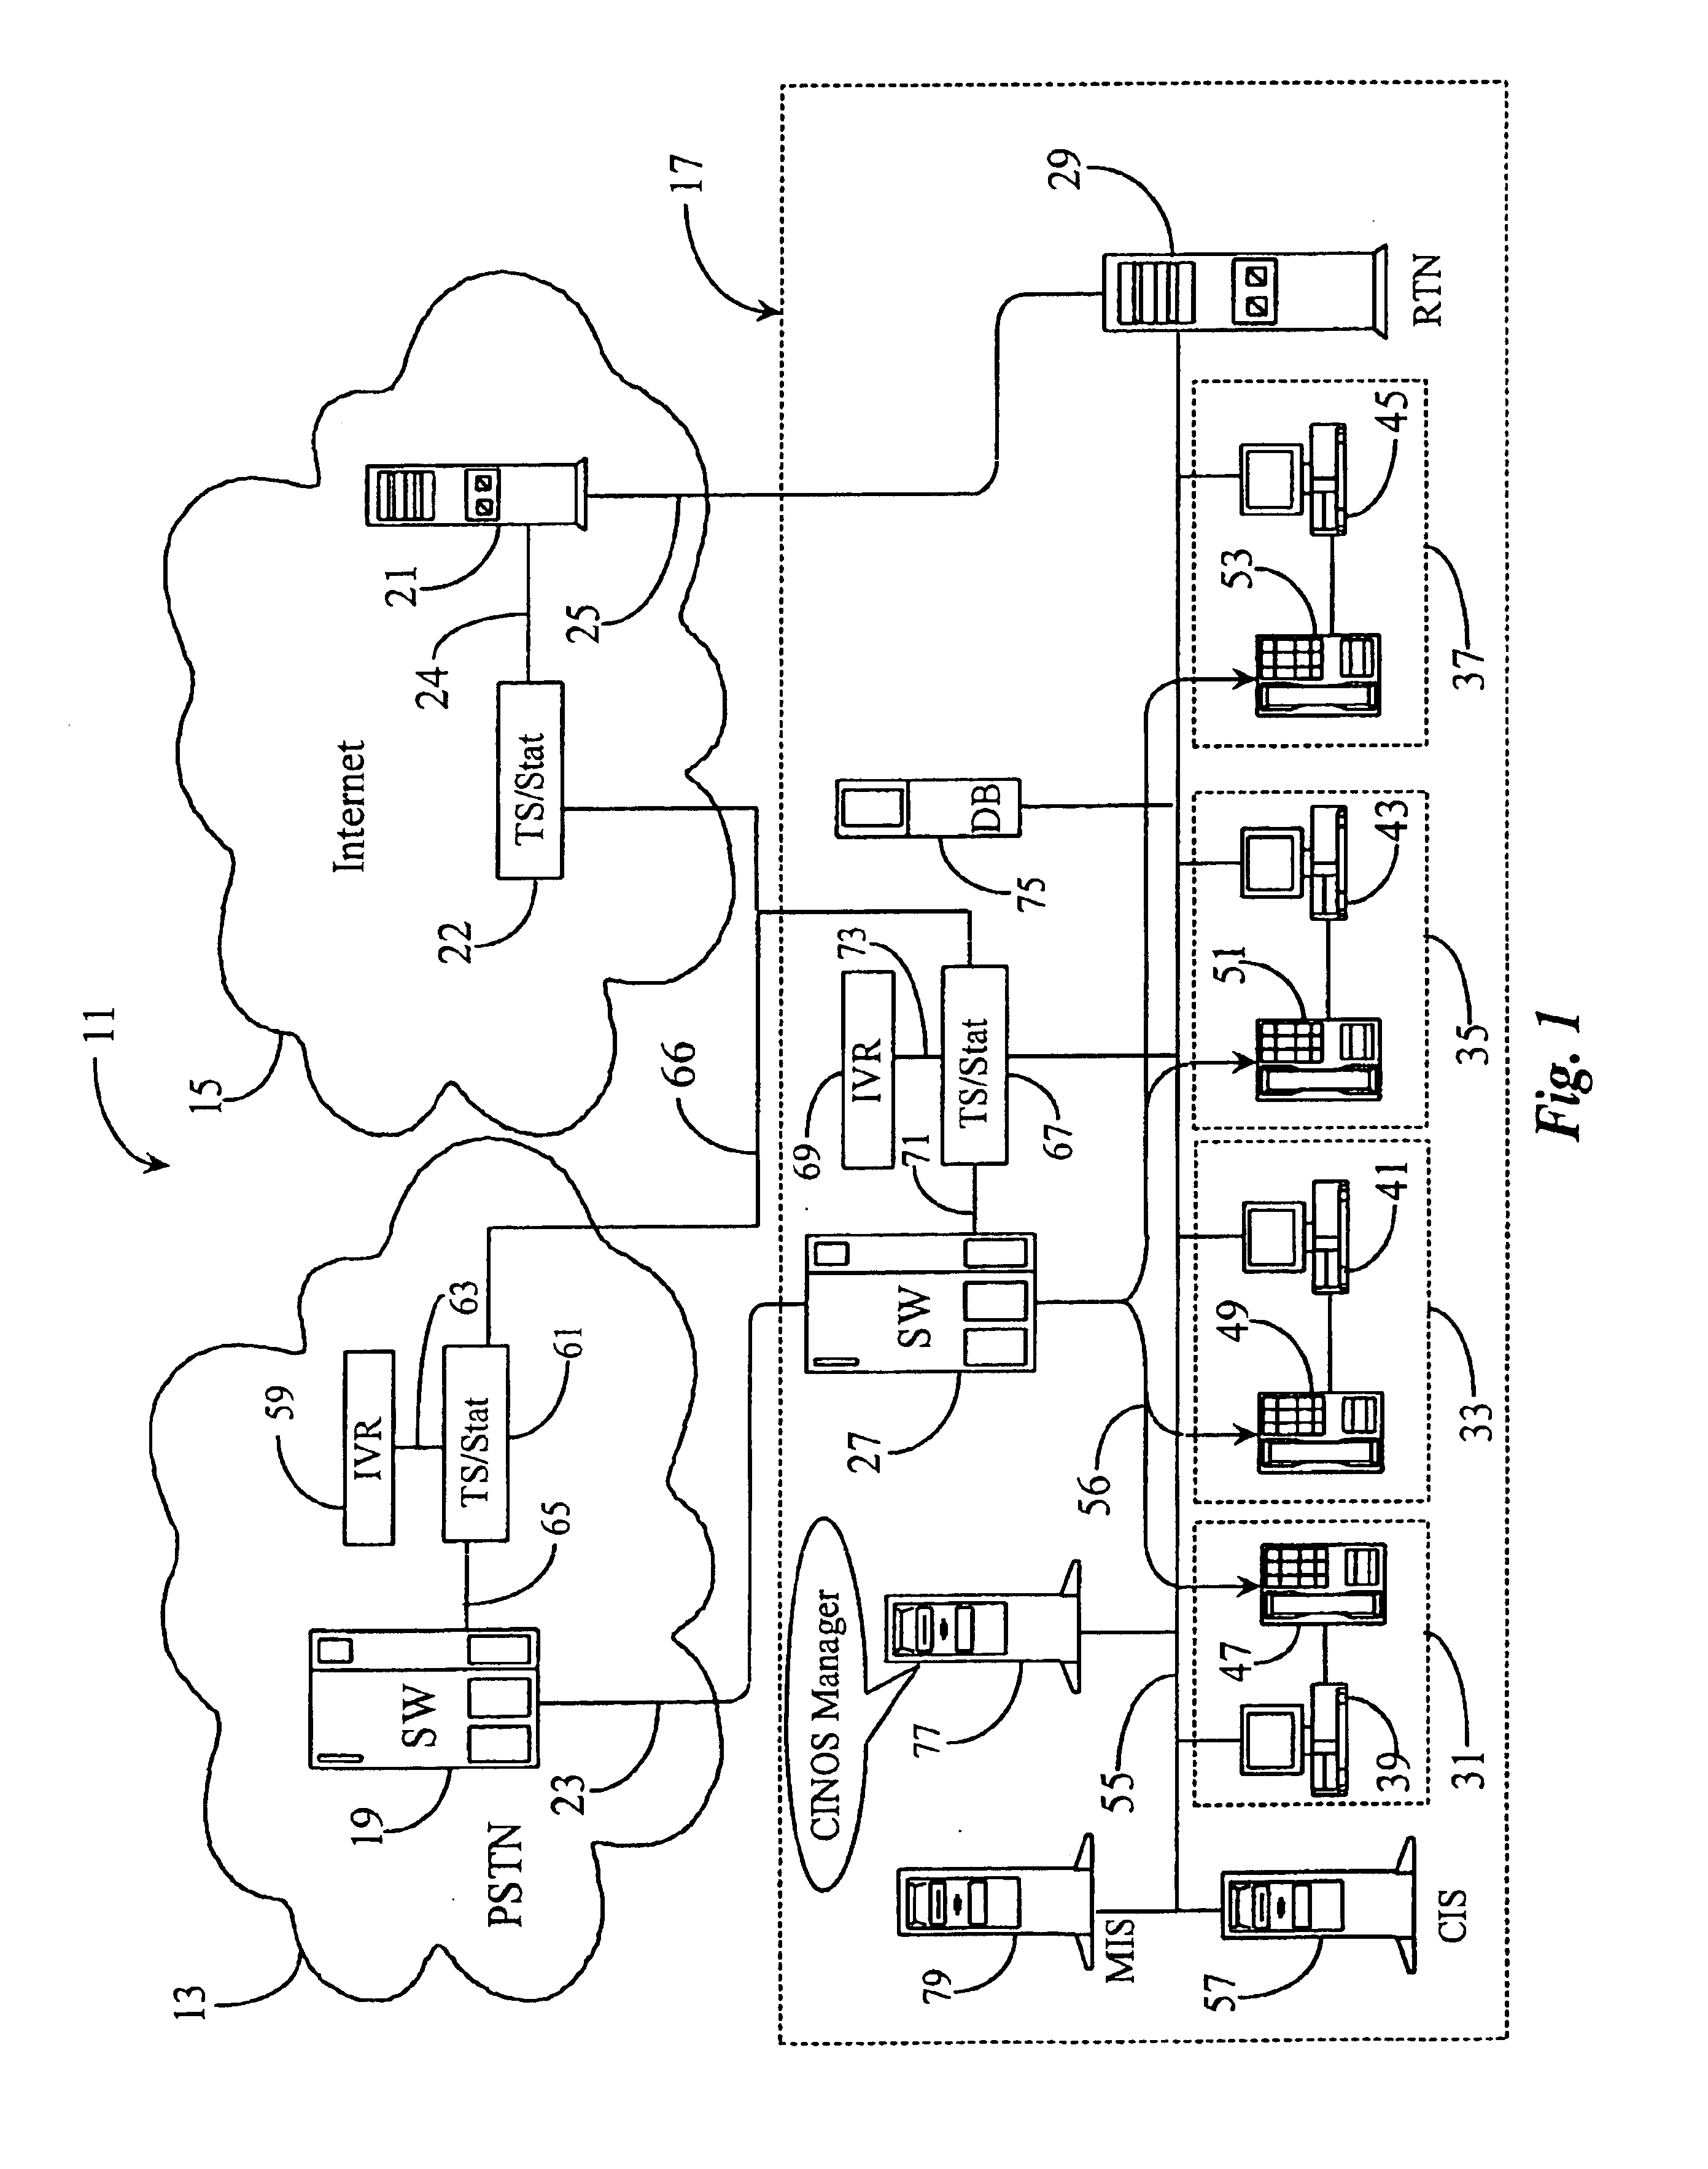 Stored-media interface engine providing an abstract record of stored multimedia files within a multimedia communication center